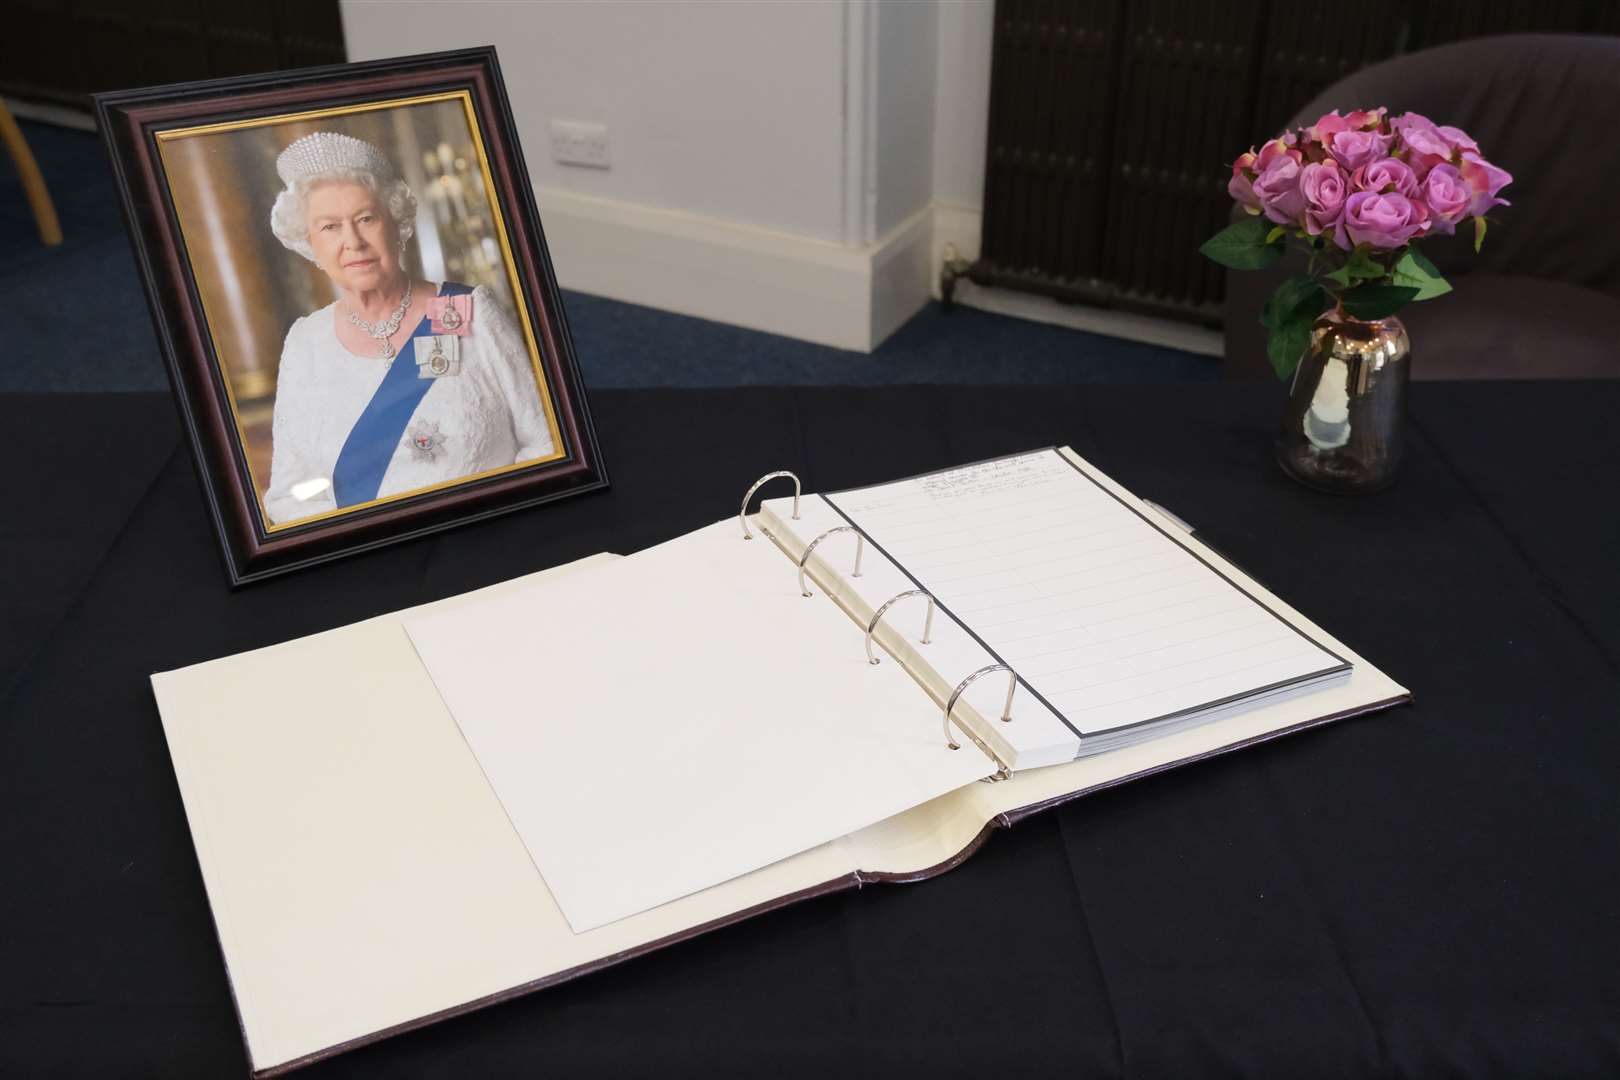 The book of condolence for the Queen at County Hall in Maidstone